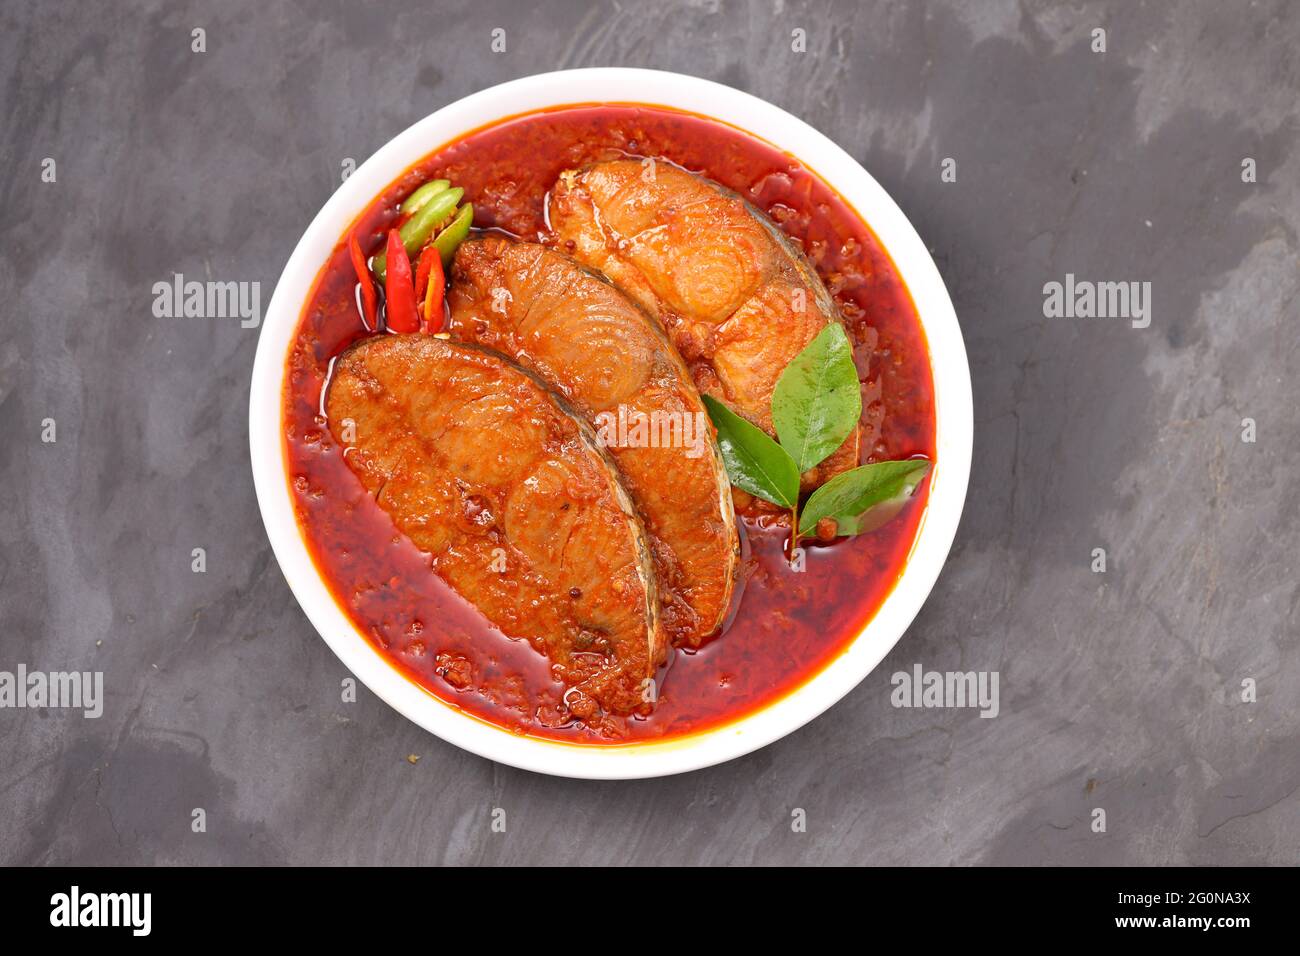 Seer Fish curry, traditional Indian fish curry ,arranged in a white ceramic bowl garnished with curry leaves and fresh chilly on a grey textured backg Stock Photo